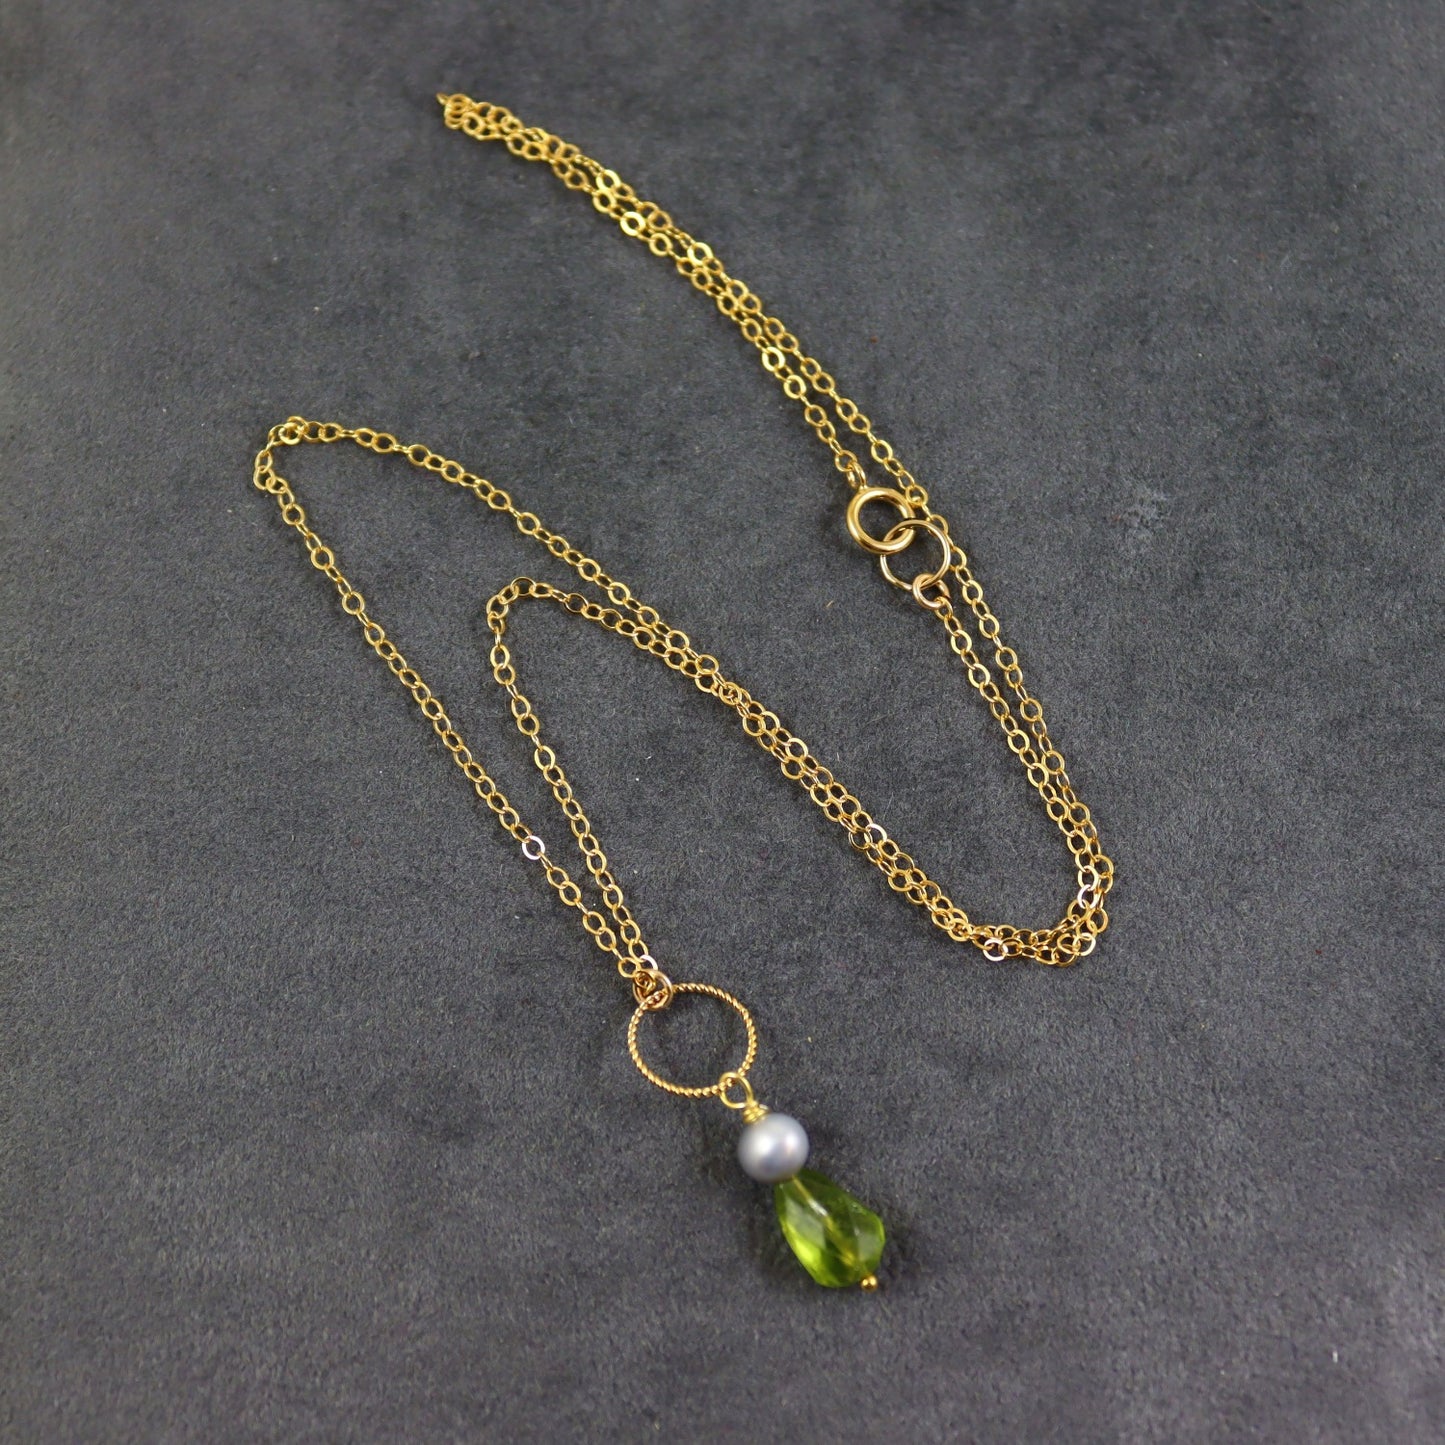 Peridot and Pearl Necklace